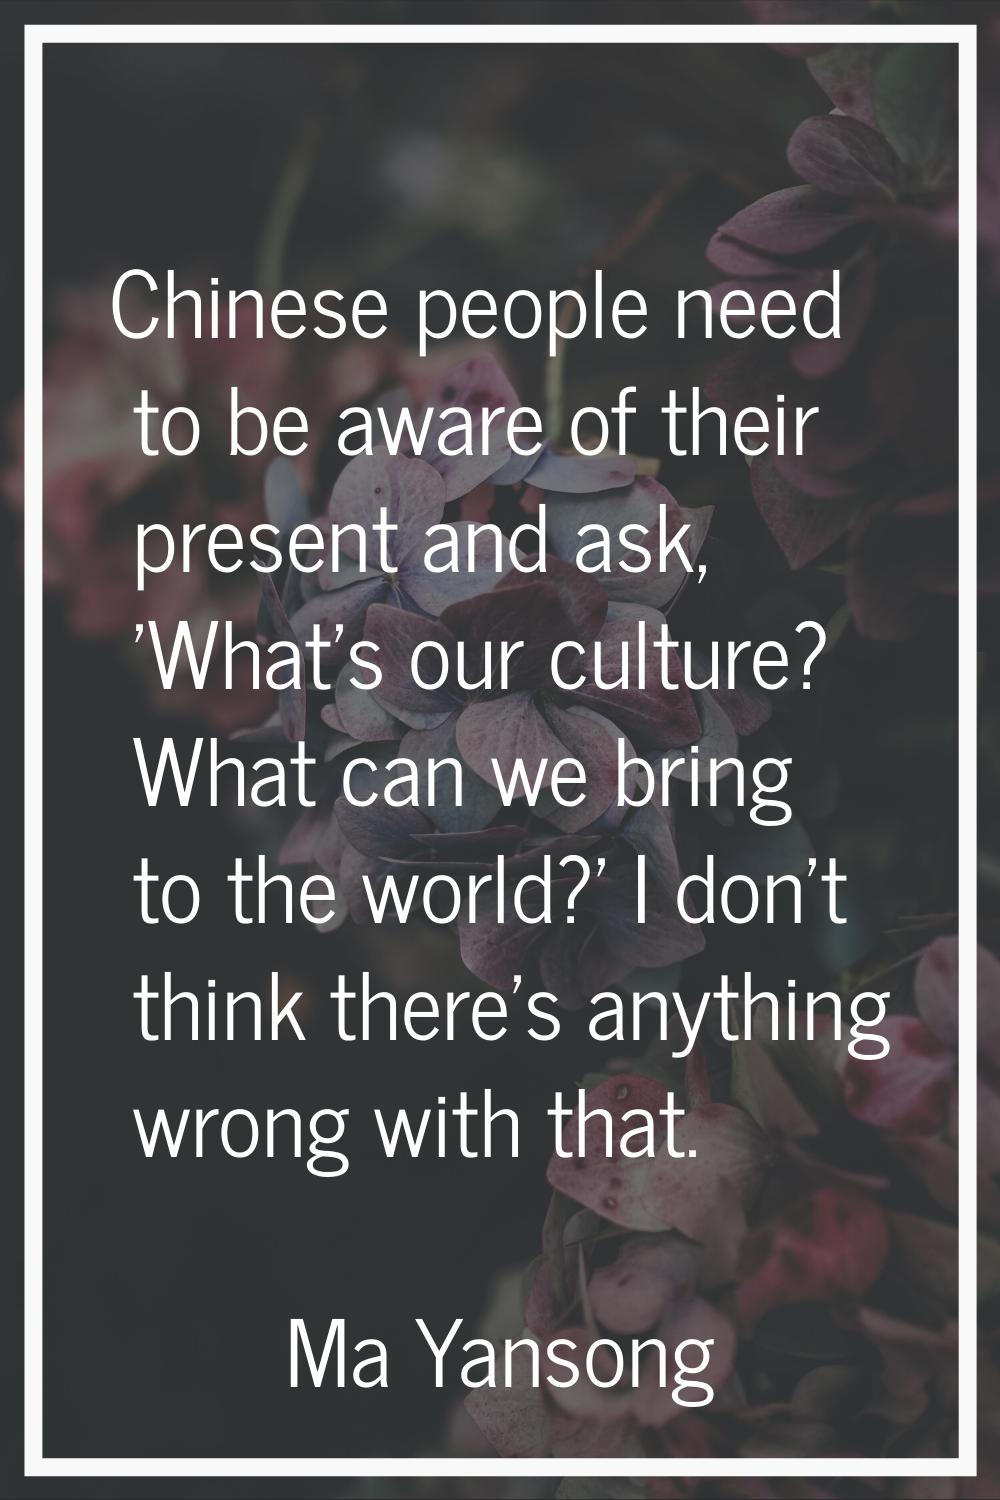 Chinese people need to be aware of their present and ask, 'What's our culture? What can we bring to